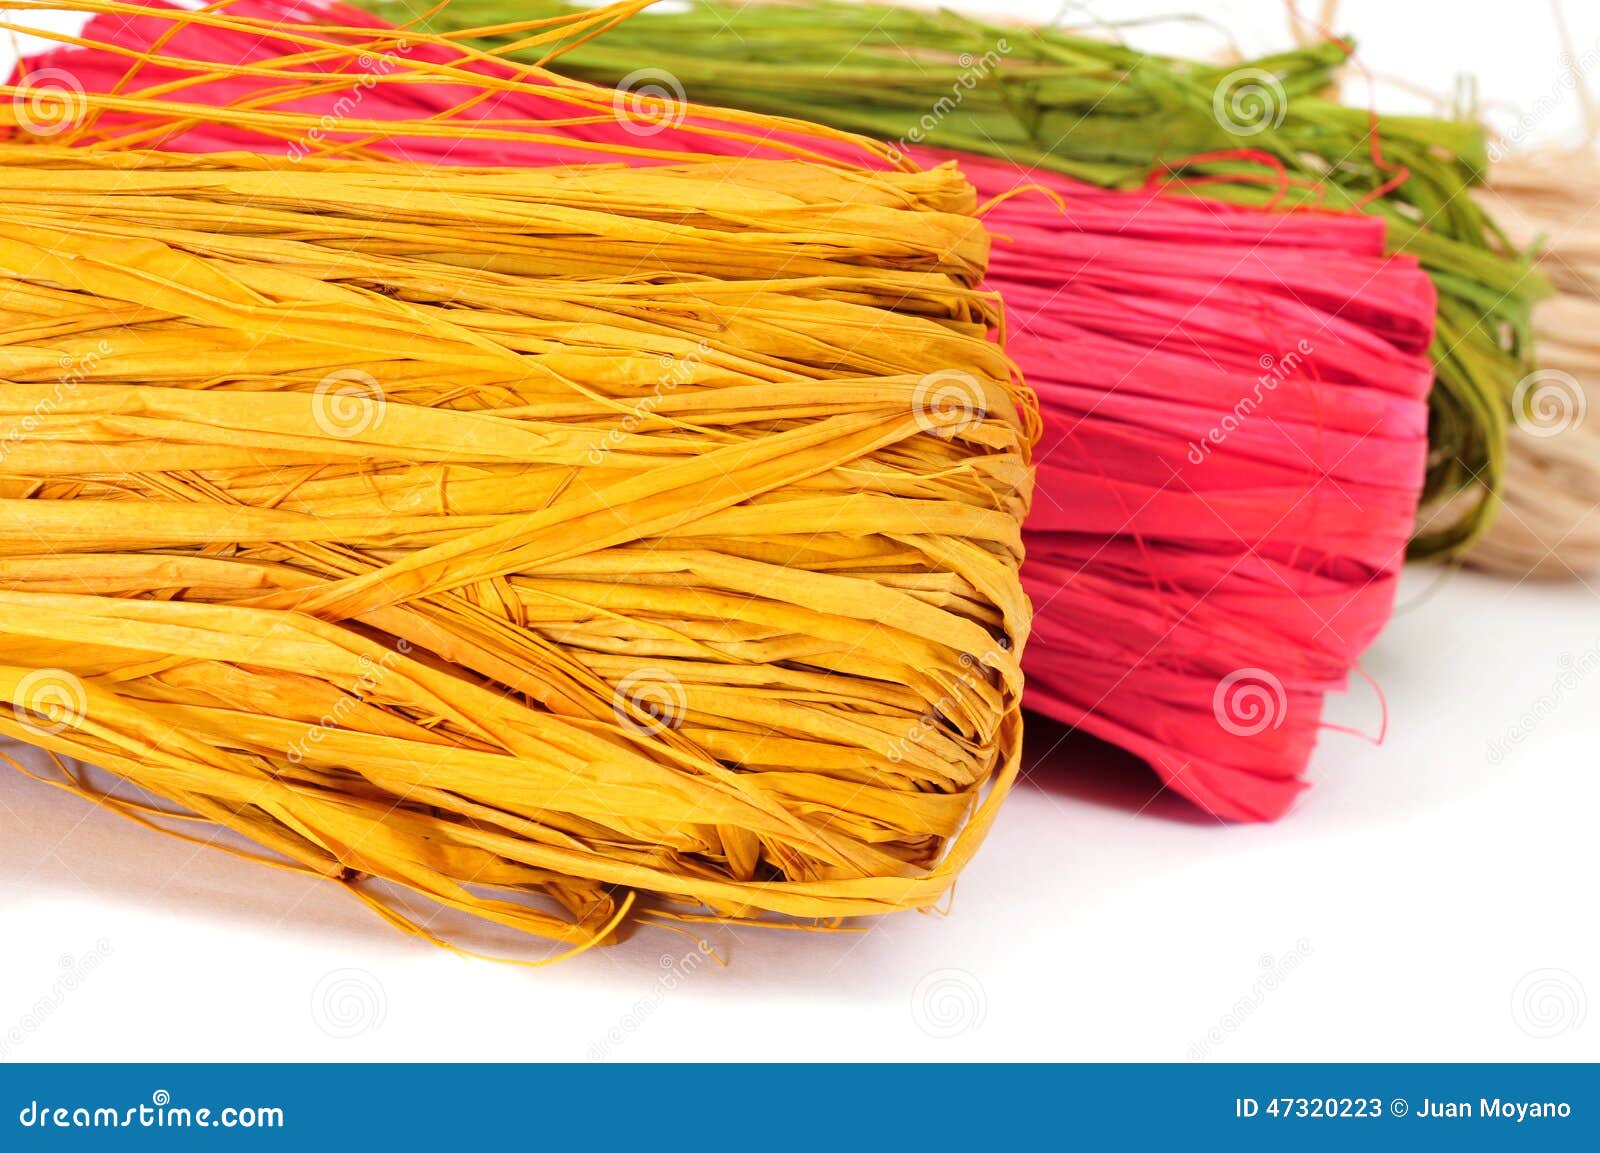 Closeup shot of a raffia ribbon for gift wrapping isolated on